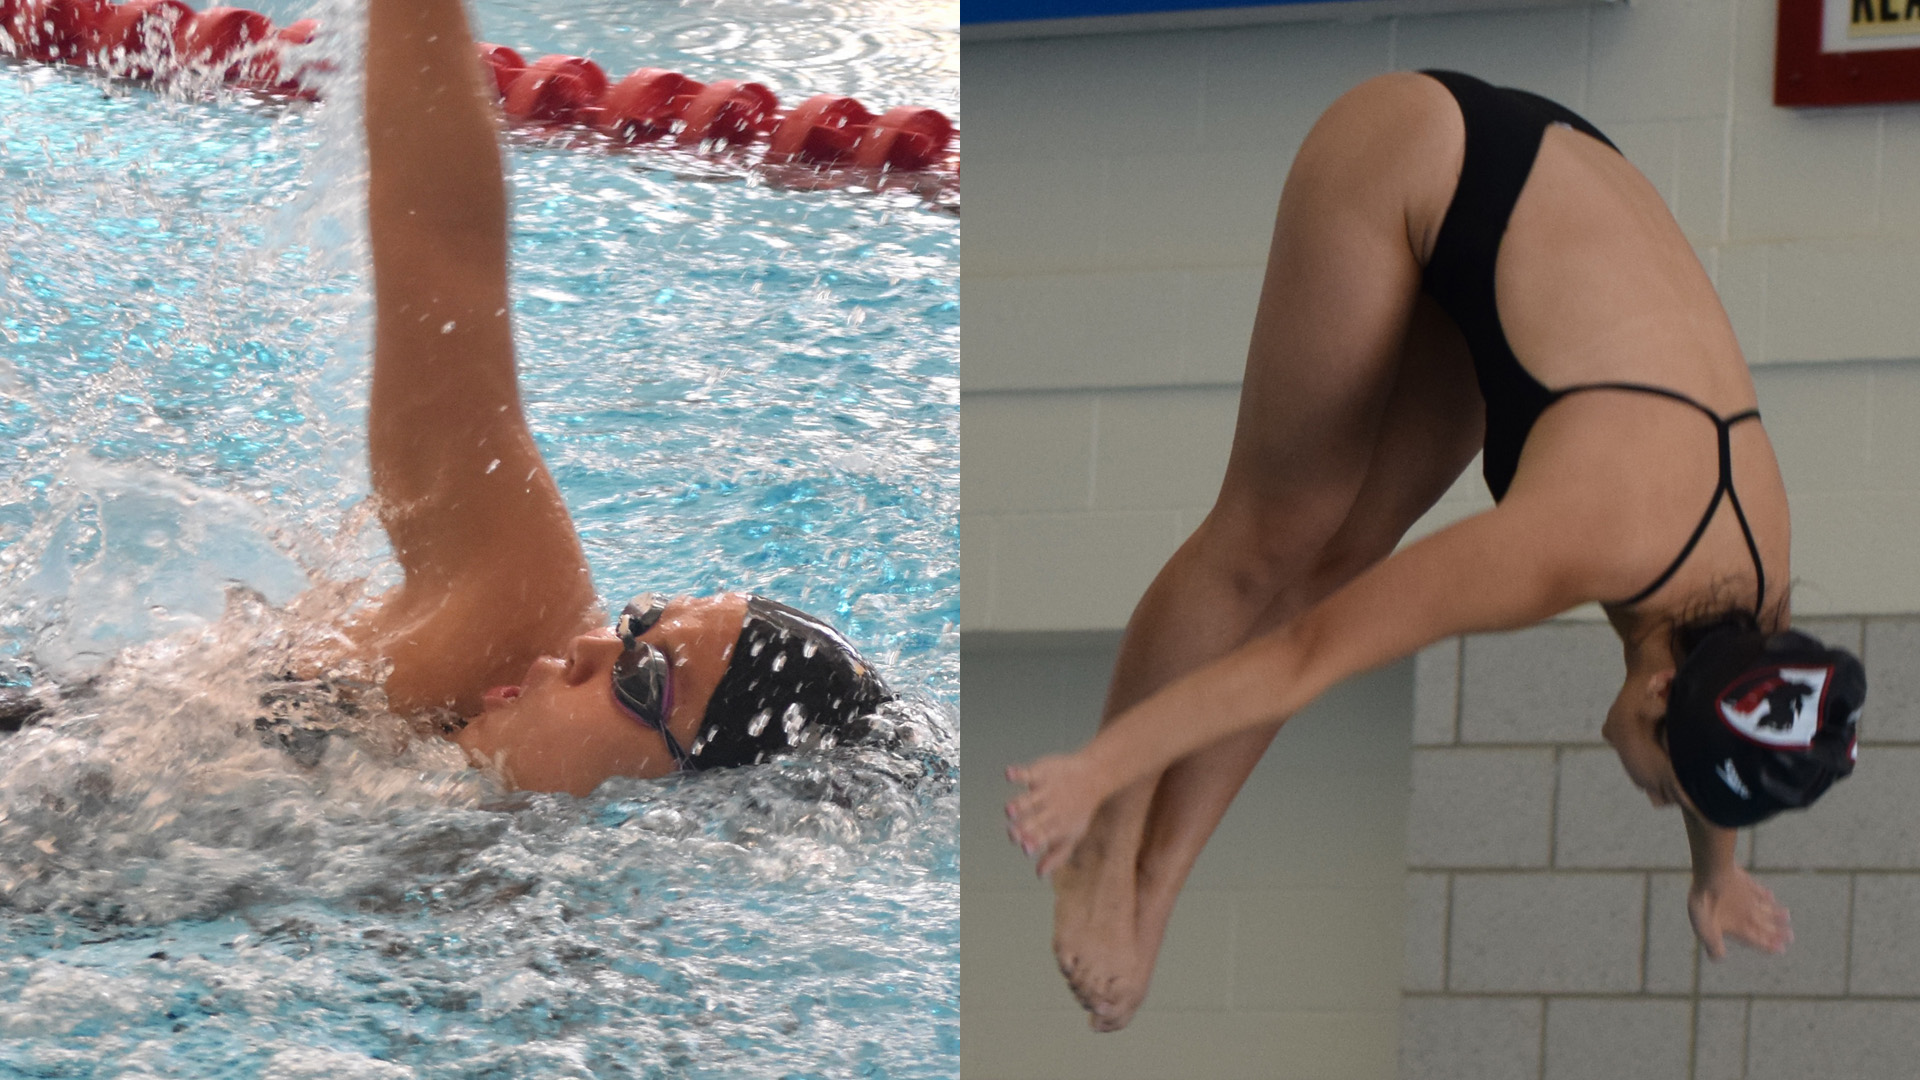 split image of a women's swimming doing backstroke and women's diver with head toward feet